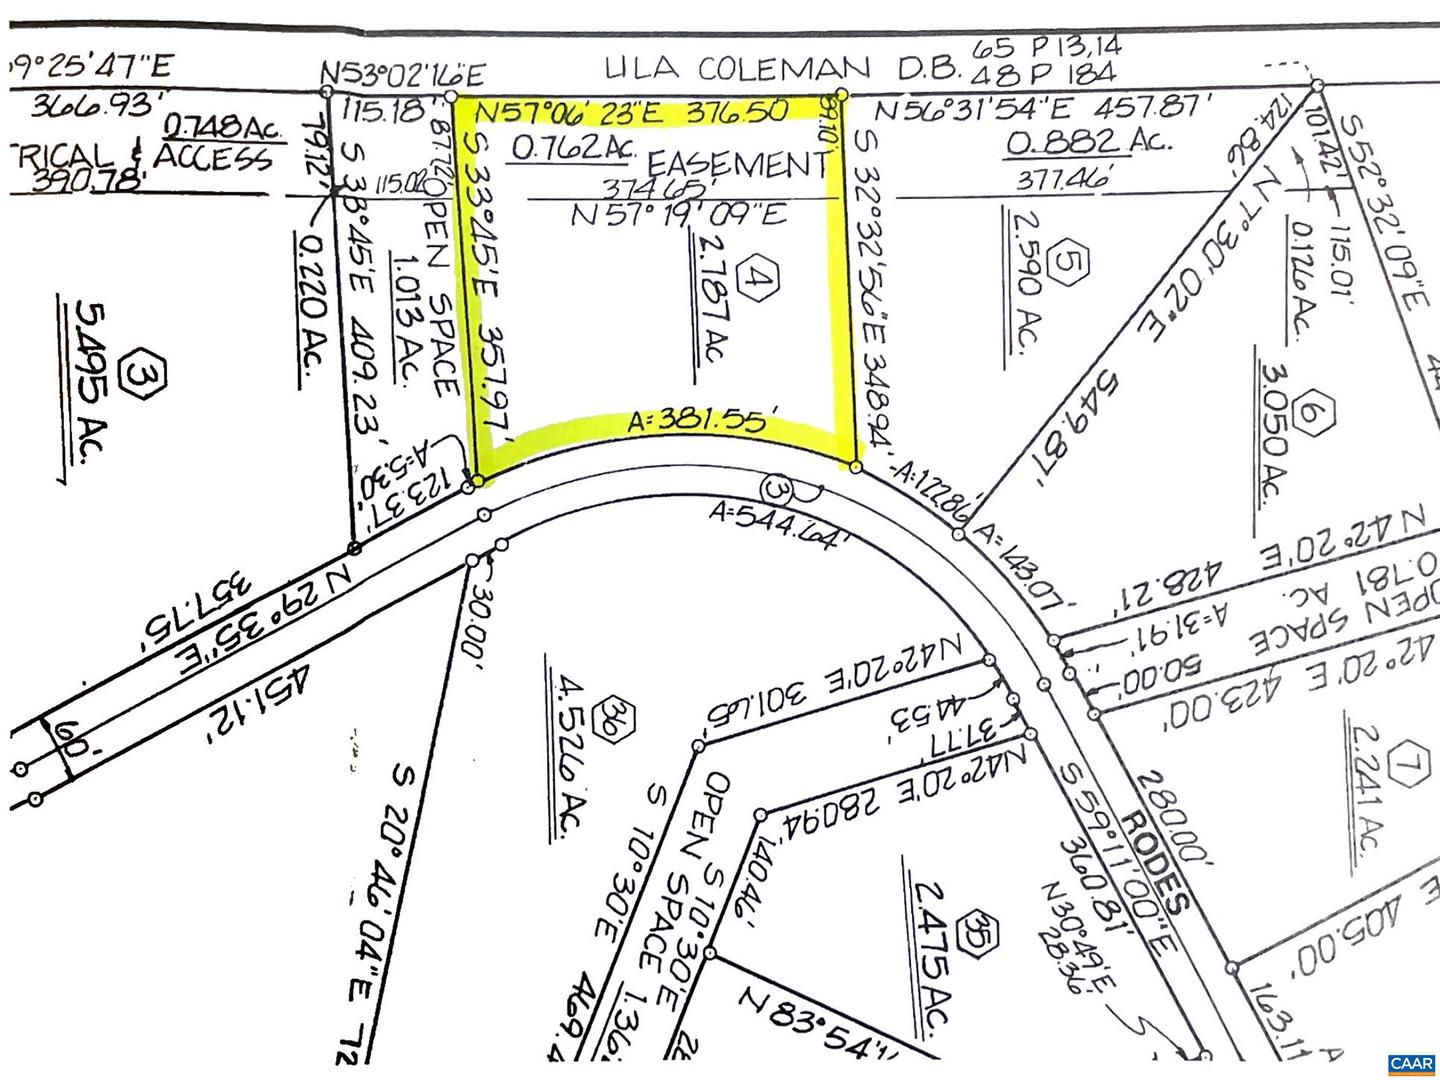 TBD RODES VALLEY DR #4, NELLYSFORD, Virginia 22958, ,Land,For sale,TBD RODES VALLEY DR #4,651042 MLS # 651042